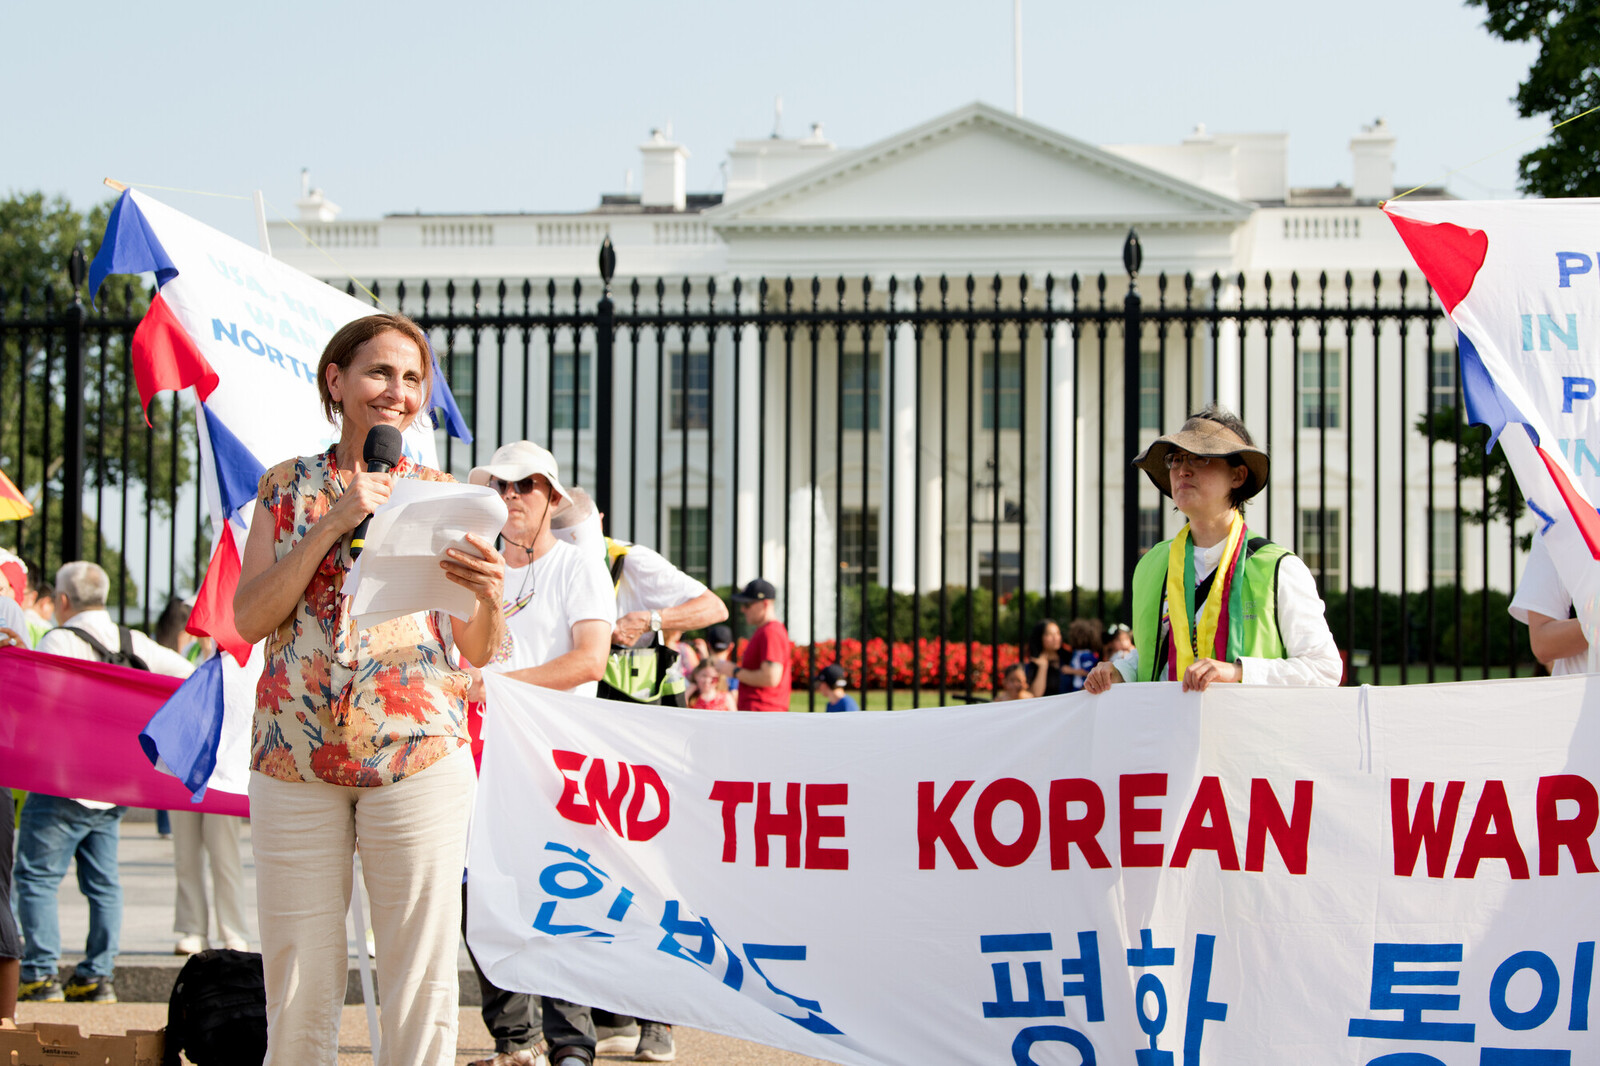 New study shows strong support for engagement and diplomacy with North Korea and China